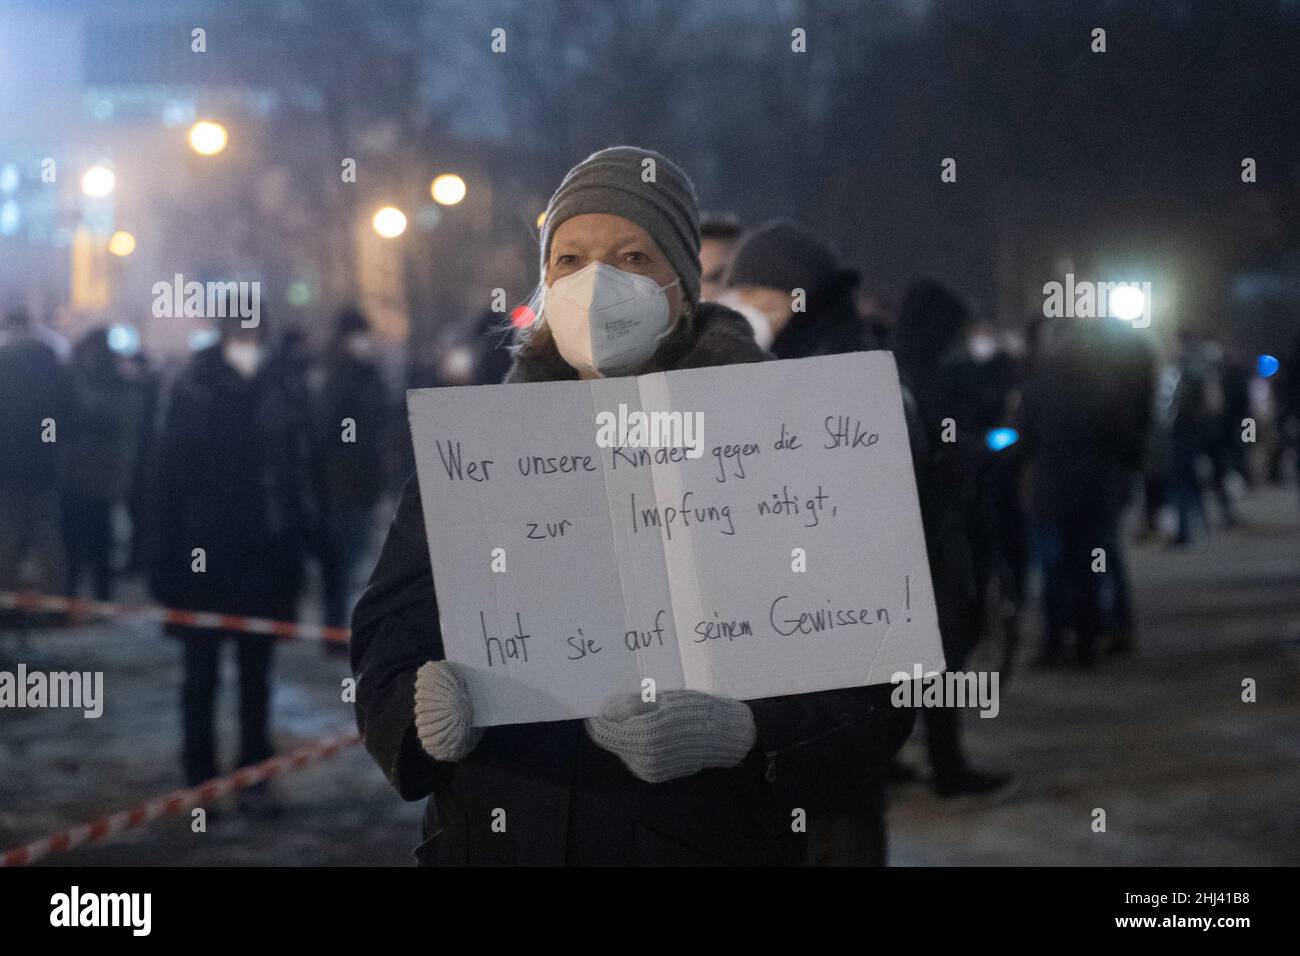 Munich, Germnay. 26th Jan, 2022. Participant with sign 'Those who force our children to vaccinate against stiko have them to his conscience'. On January 26, 2022, around 3000 anti vaxxers gathered at Koenigsplatz in Munich to demonstrate against the Covid-19 protection measures as well as compulsory vaccination. (Photo by Alexander Pohl/Sipa USA) Credit: Sipa USA/Alamy Live News Stock Photo